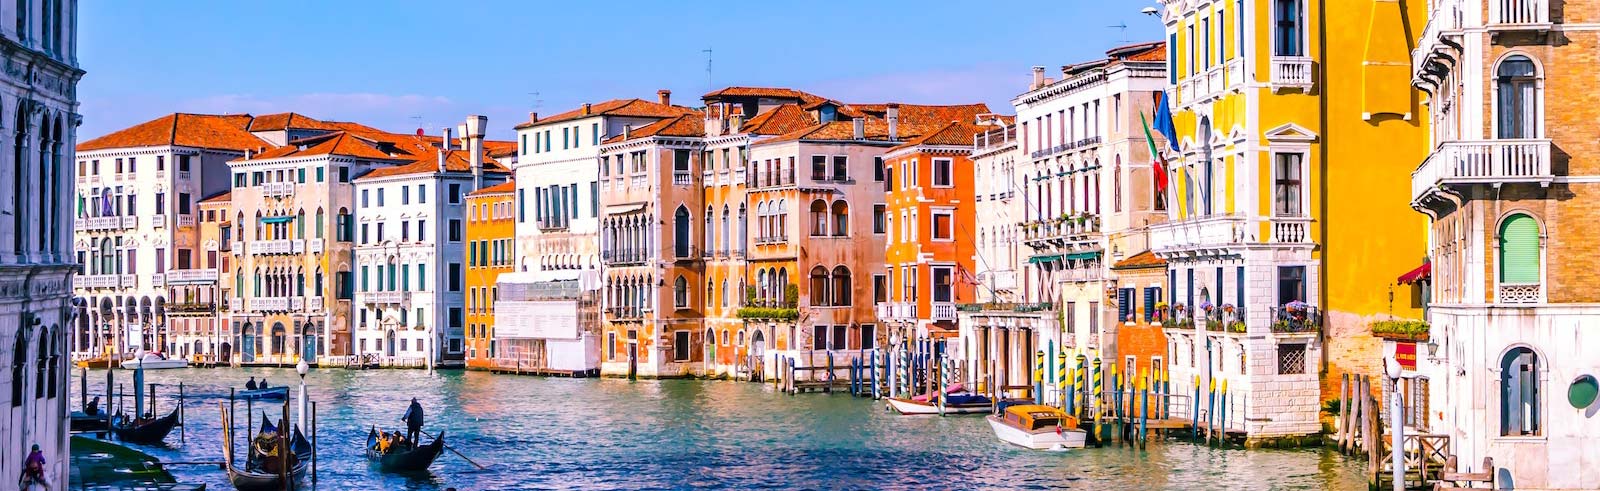 Venice Italy canal with colorful buildings